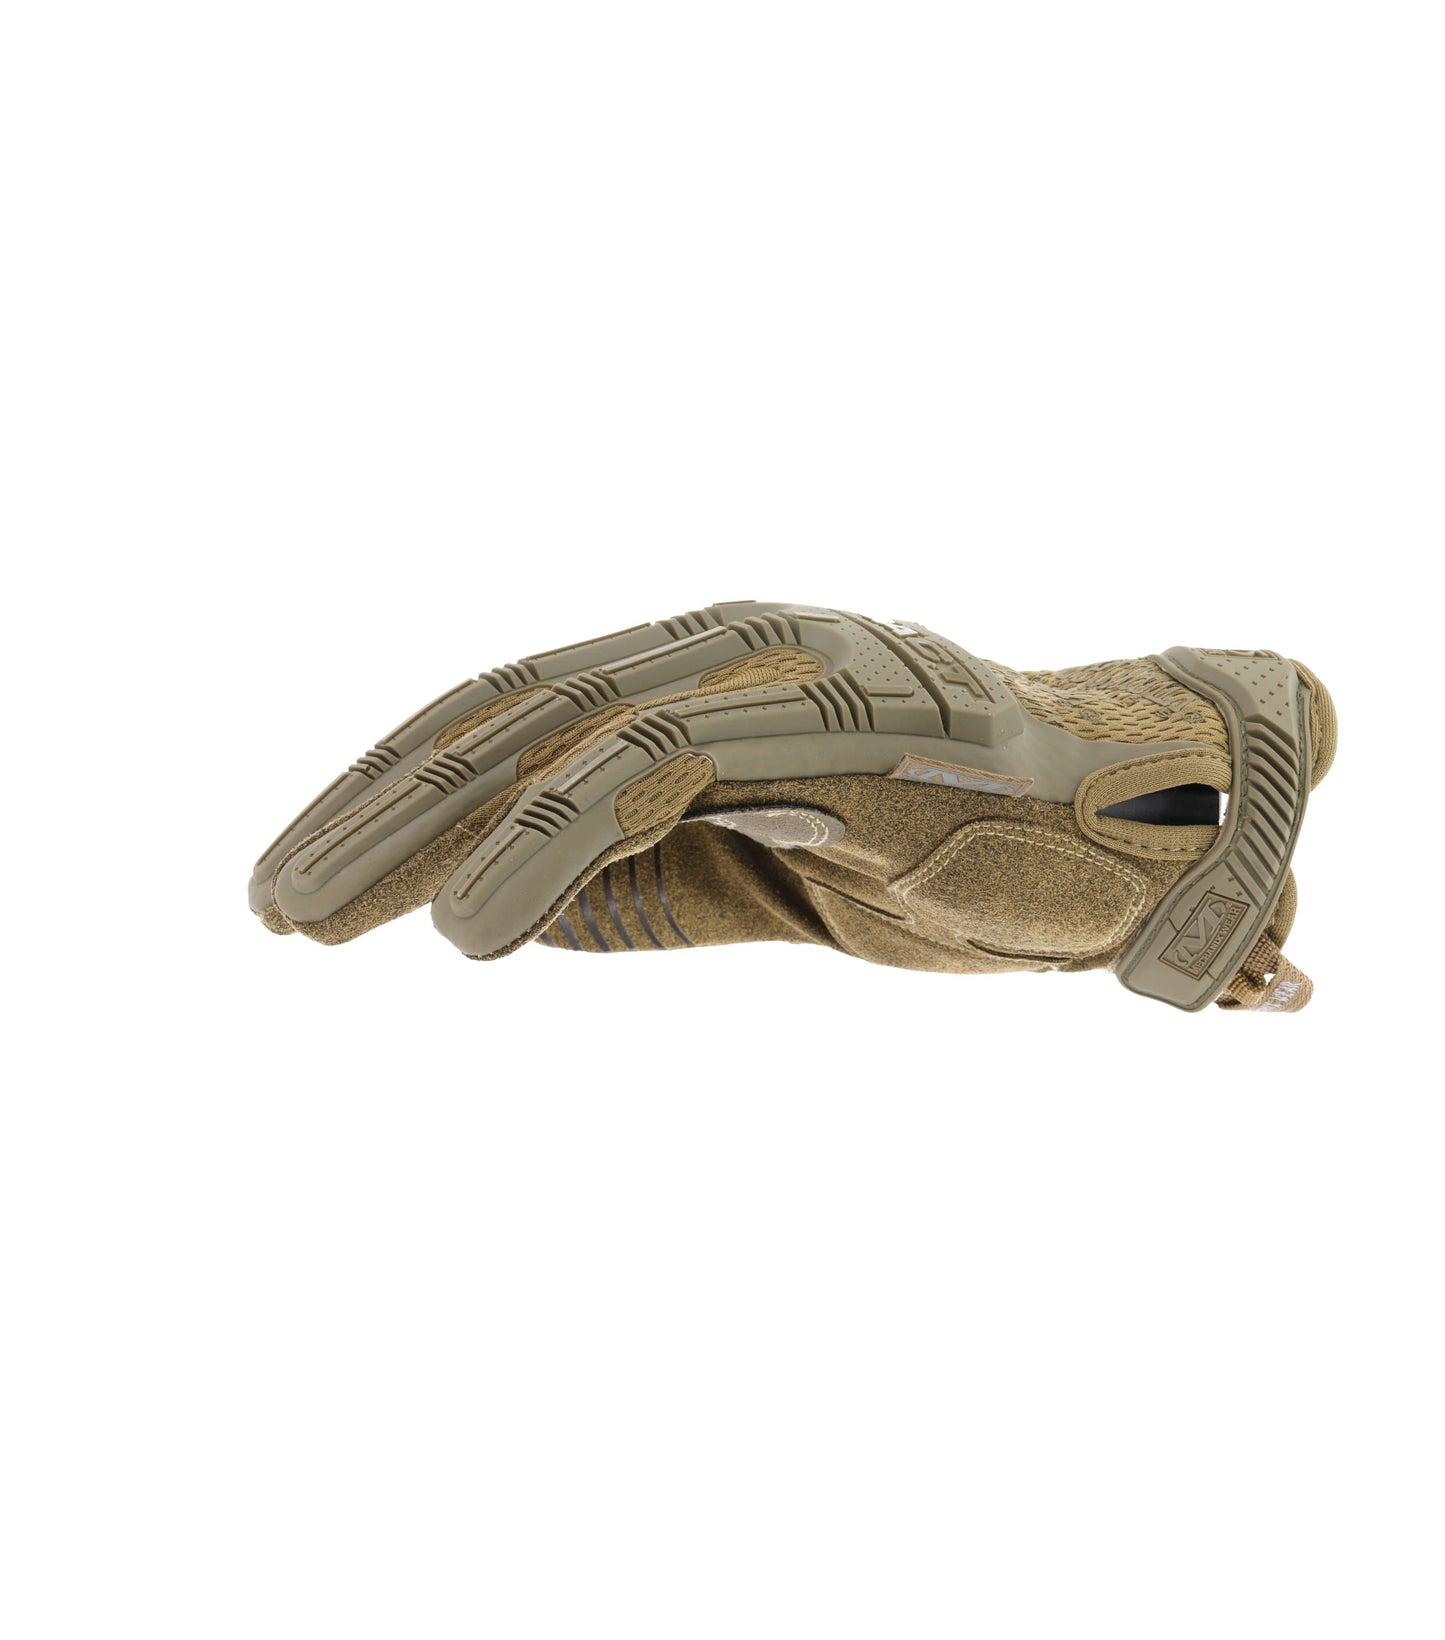 M-PACT Coyote Glove